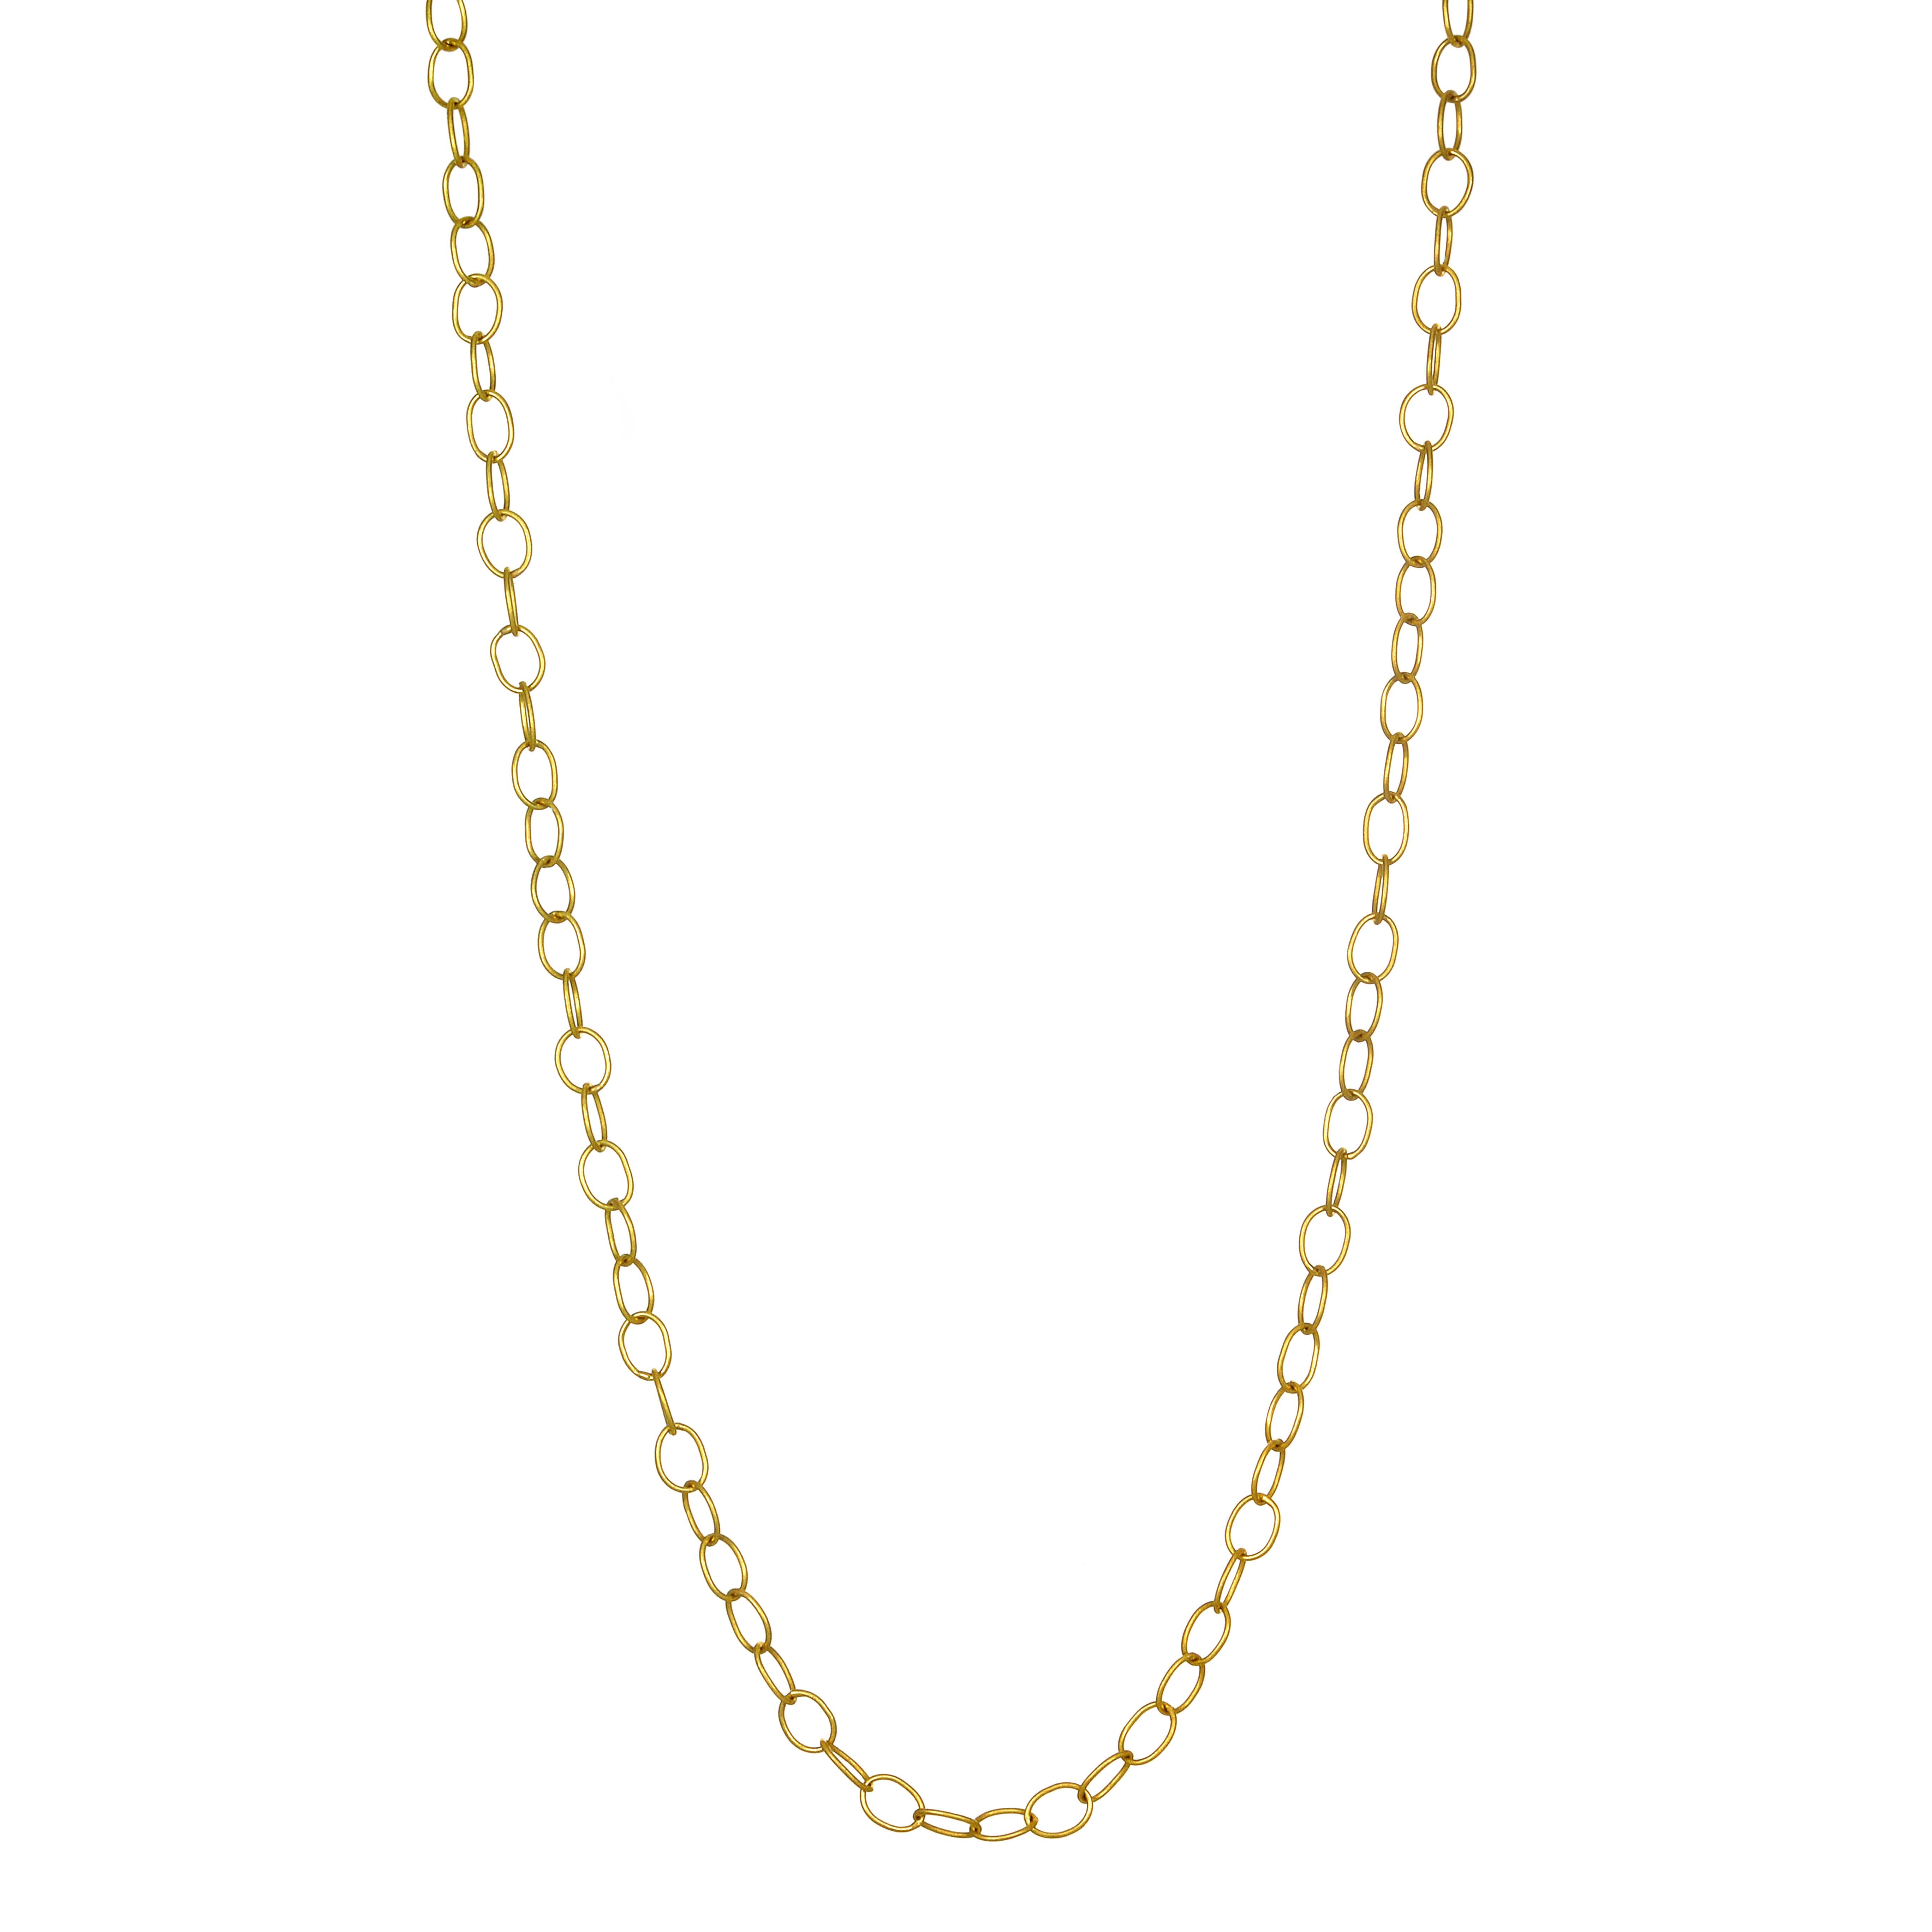 Faye Kim 18 Karat Gold Handmade Medium Oval Link Chain

Classic and versatile, Faye's 18k gold handmade medium oval link chain is a must in every jewelry wardrobe. It elevates the traditional cable link chain to a new level. 4MM in width, it's great